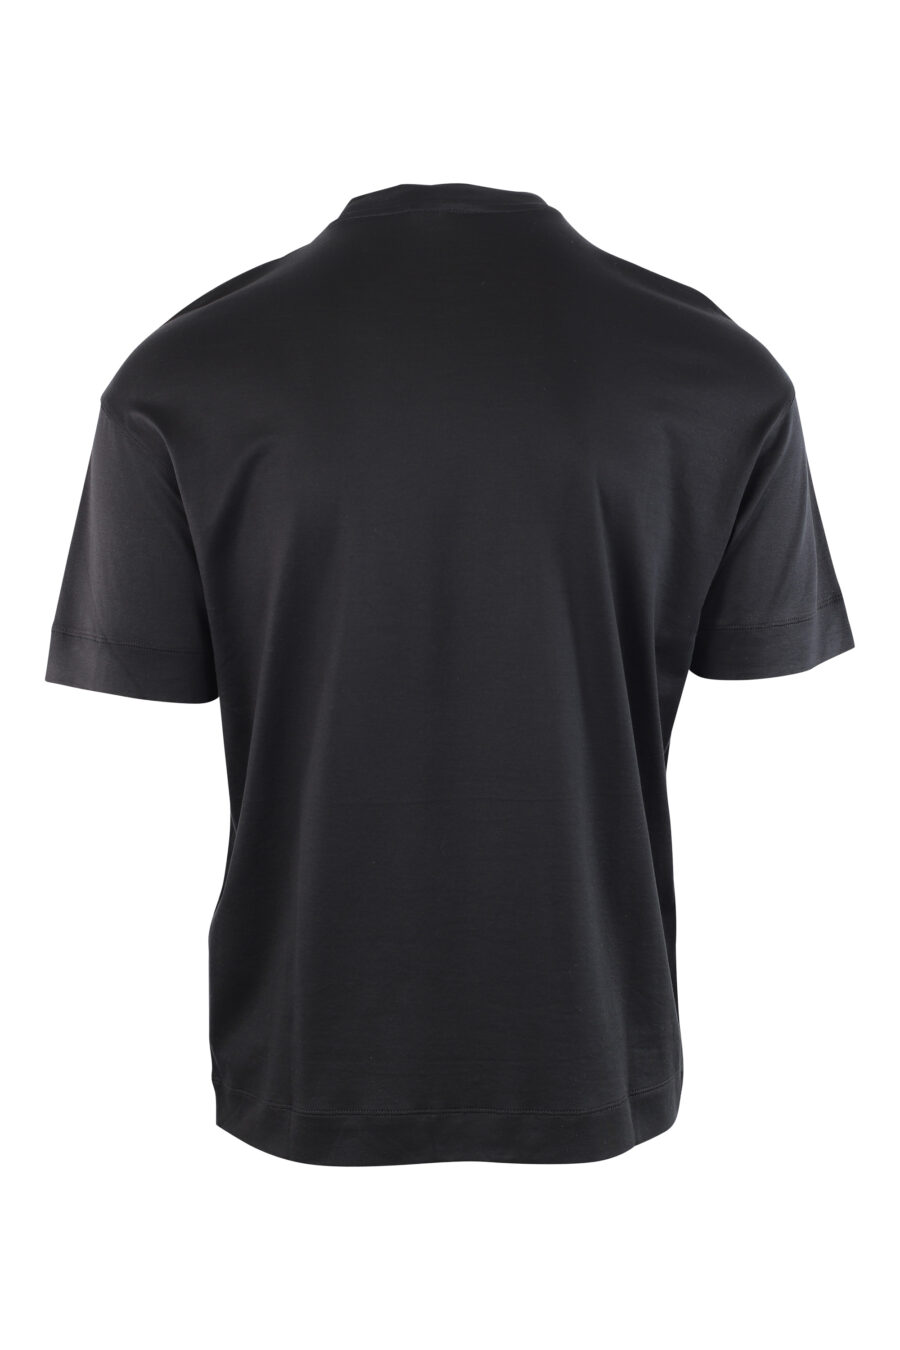 Black T-shirt with monochrome logo centred - IMG 3783